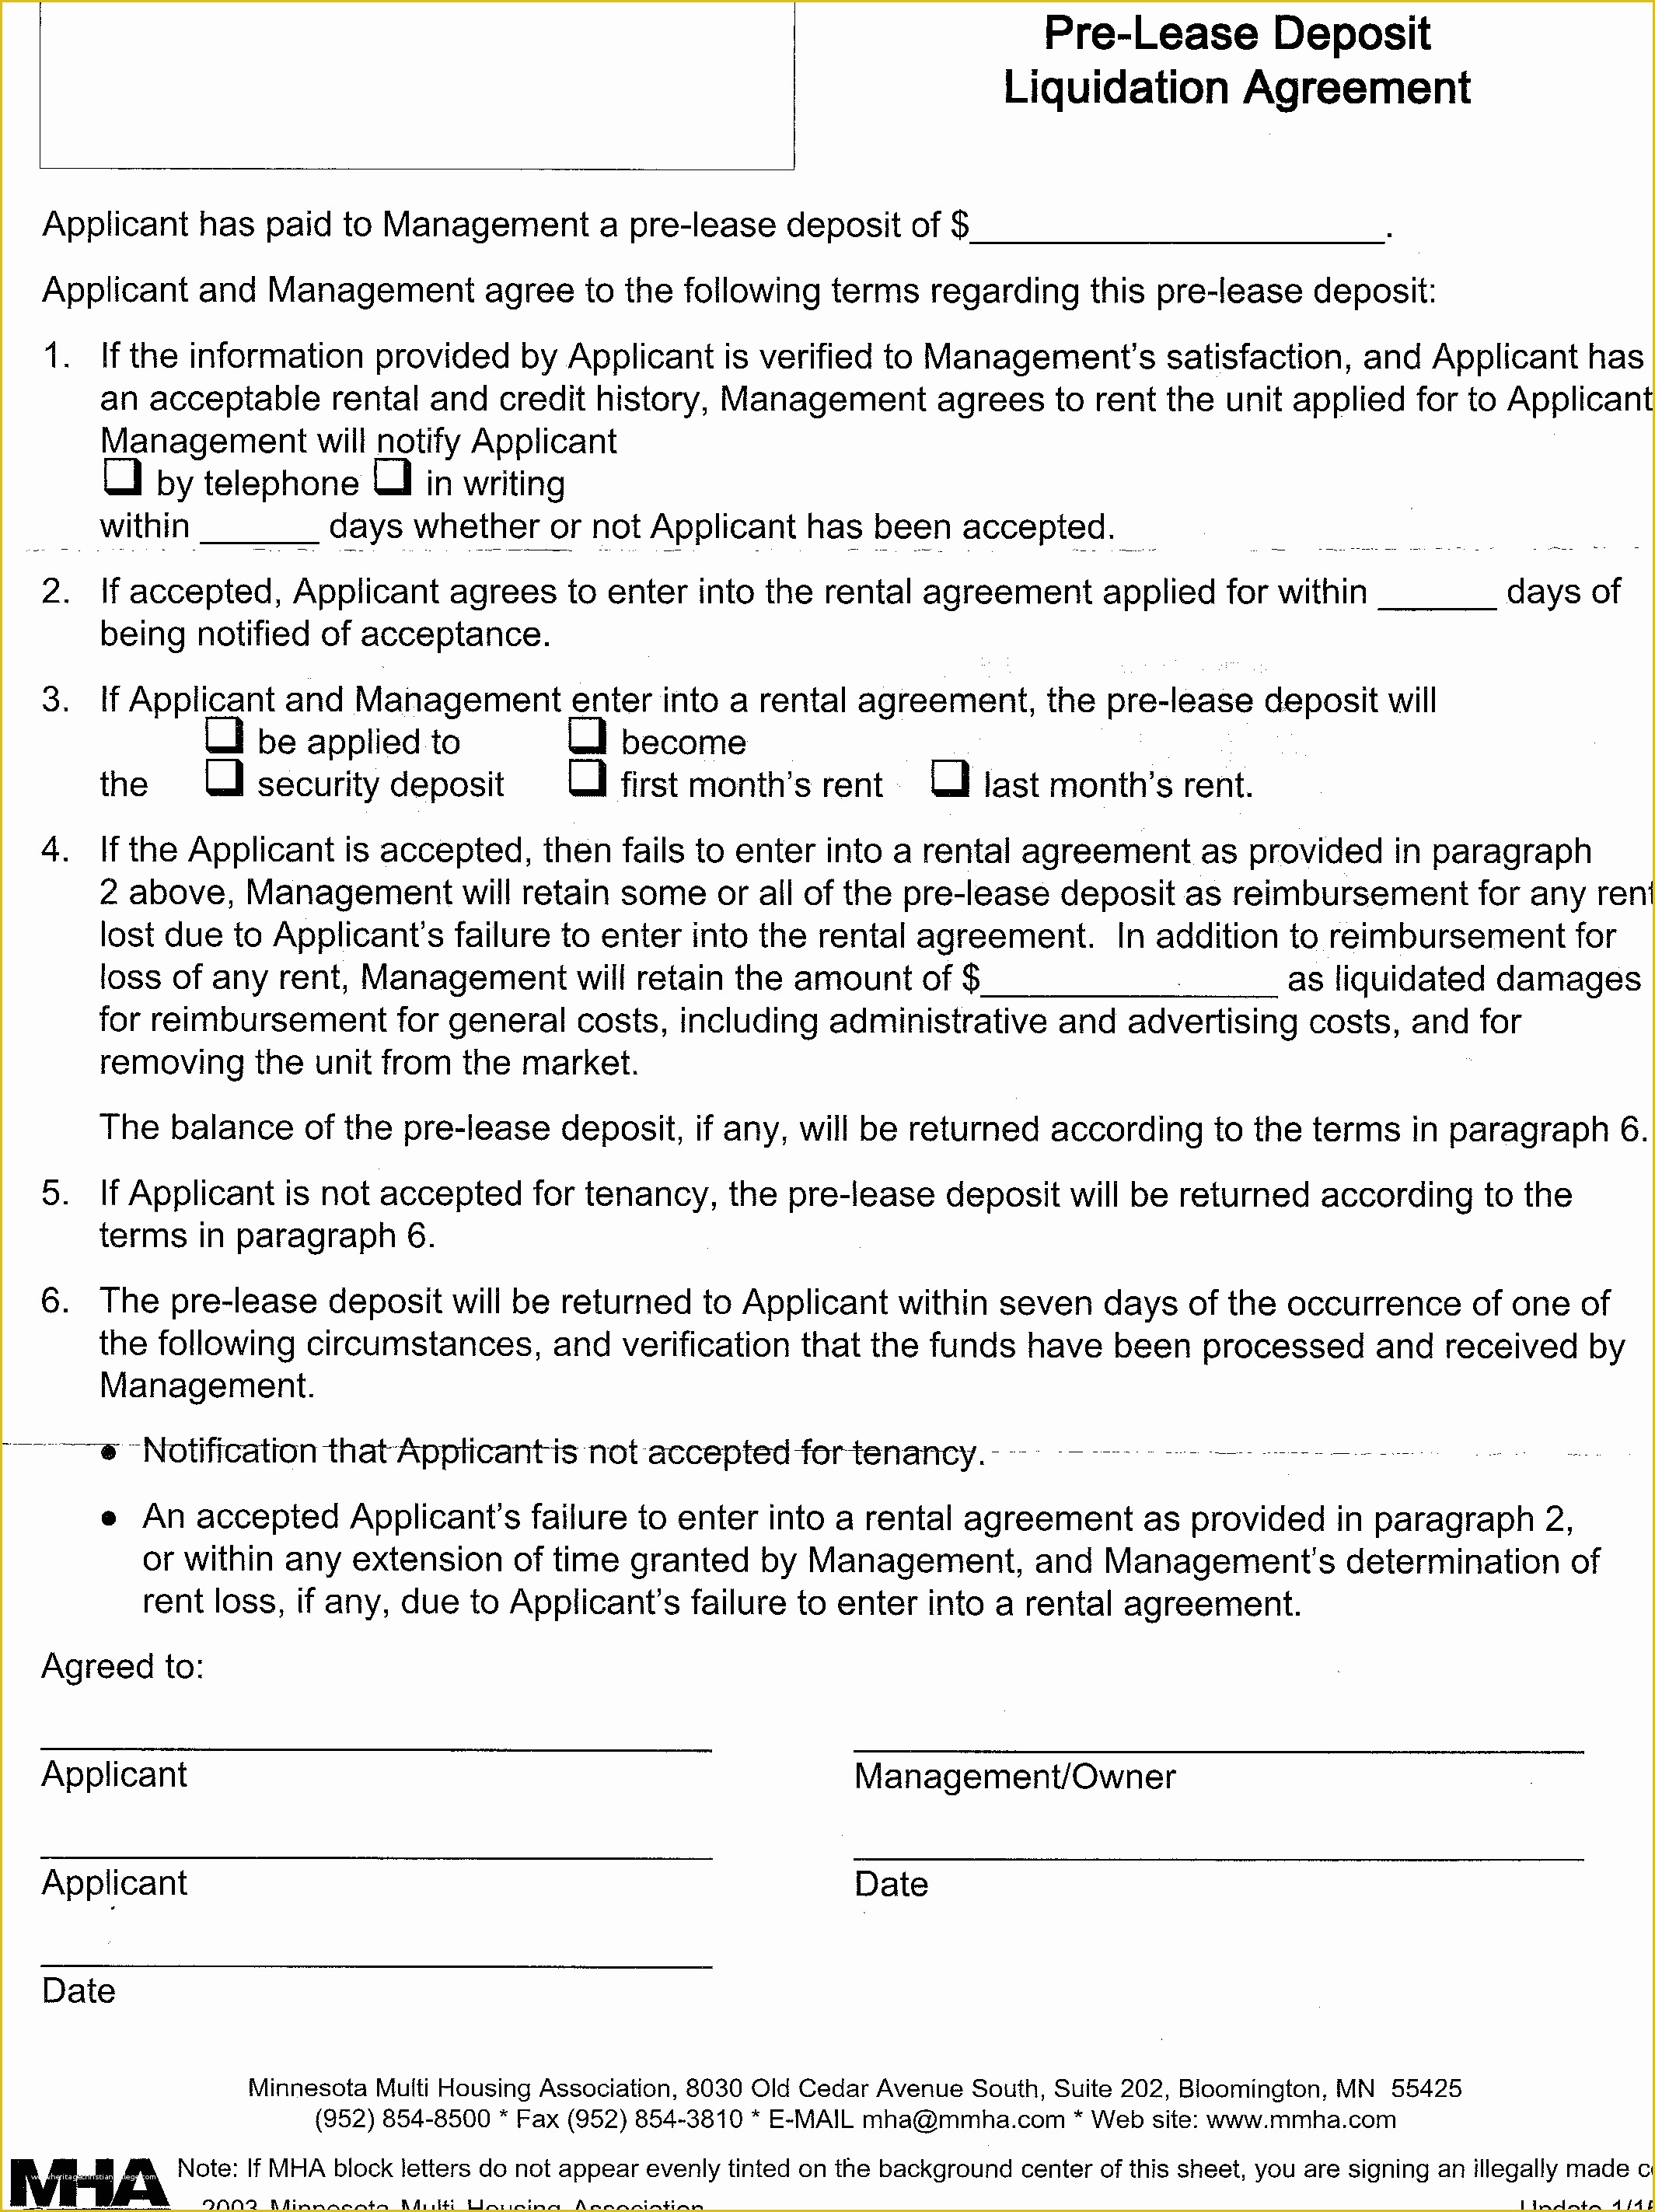 Free Lease Template Of Blank Lease Agreement Example Staruptalent